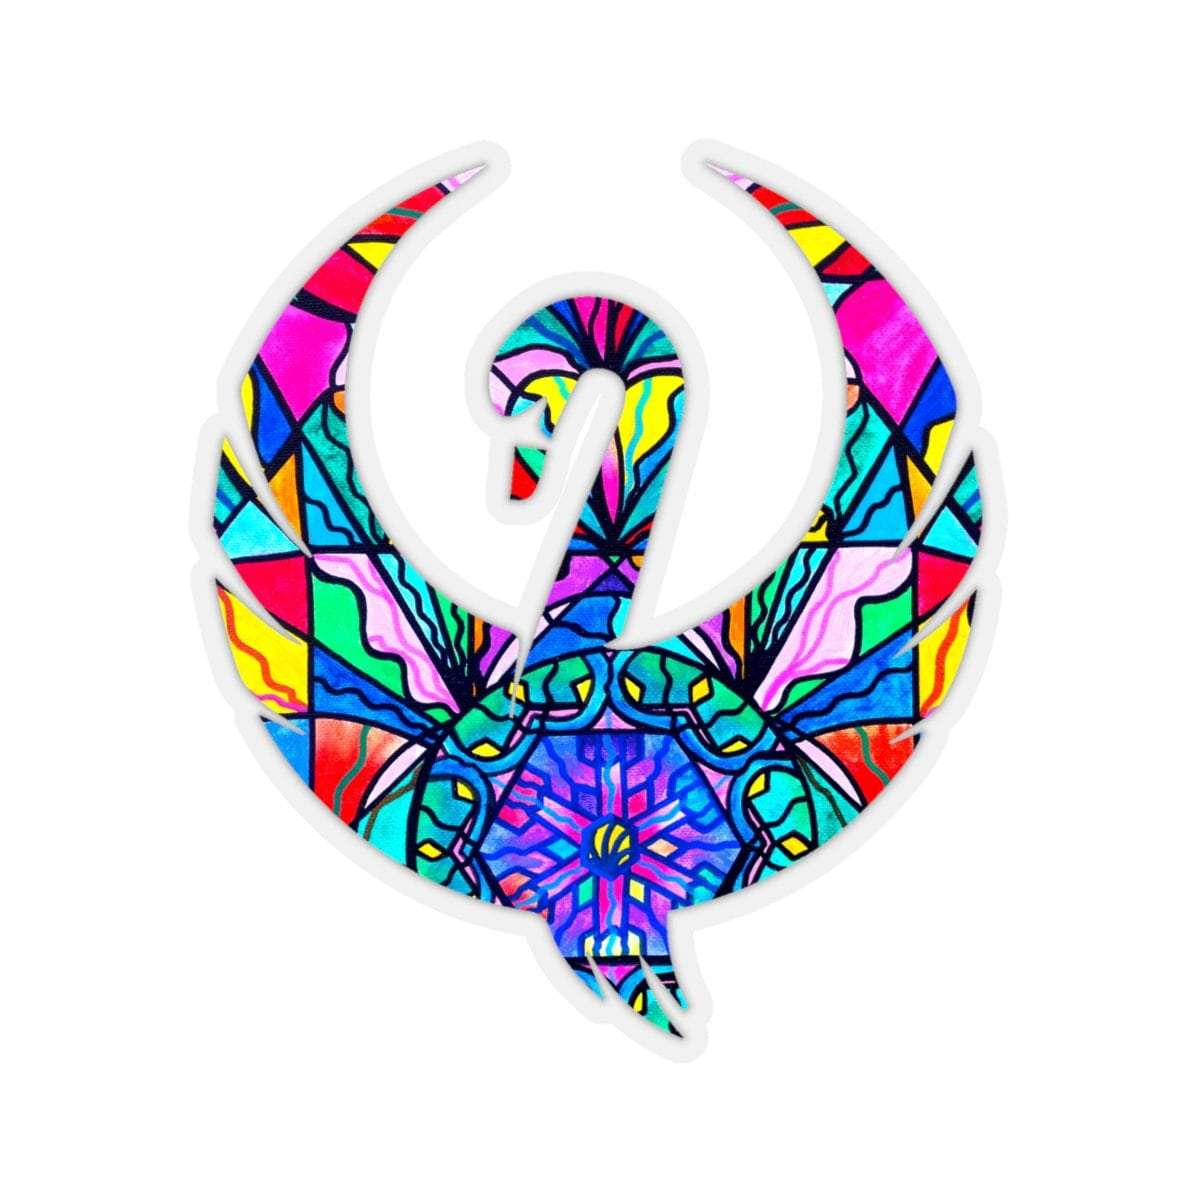 be-the-first-to-own-the-newest-anahata-heart-chakra-swan-stickers-supply_3.jpg